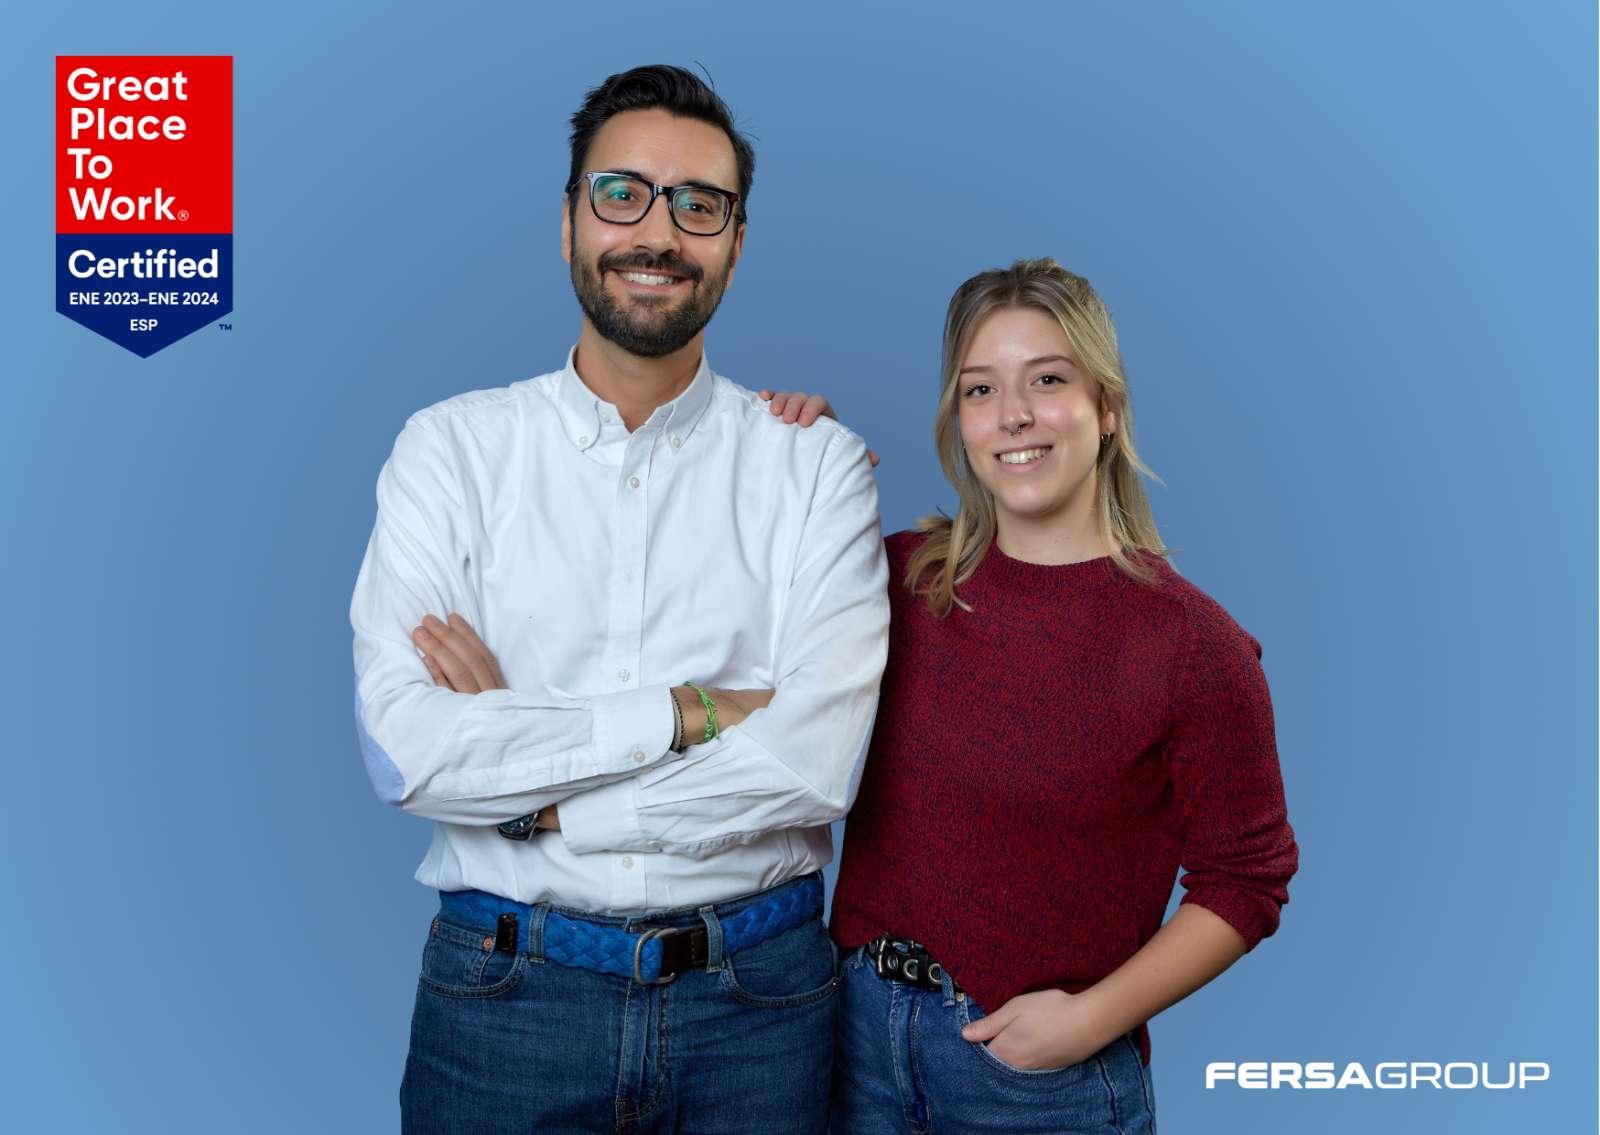 Fersa Group, the first industrial company in Aragon (Spain) to be recognized by ‘Great Place to Work’, renews this certification for the second consecutive year.